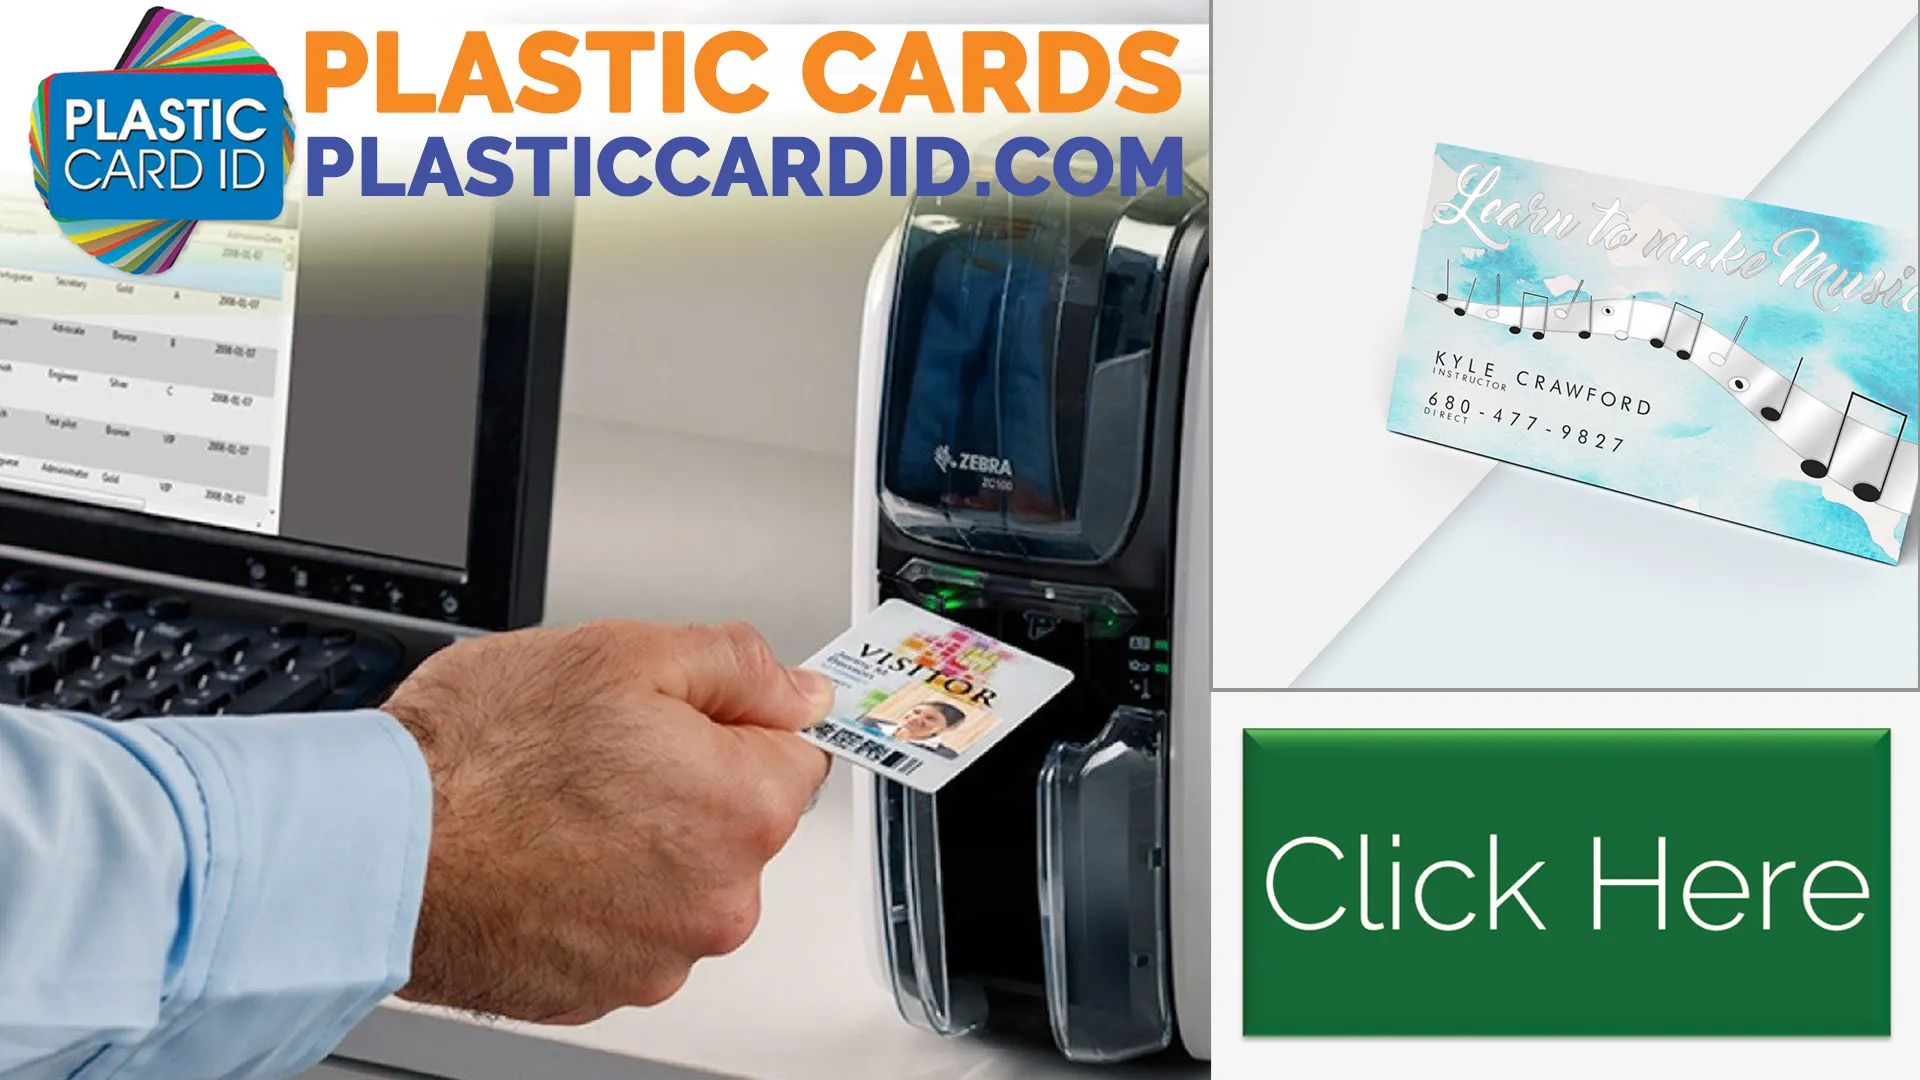 State-of-the-Art Card Printers for Every Scale